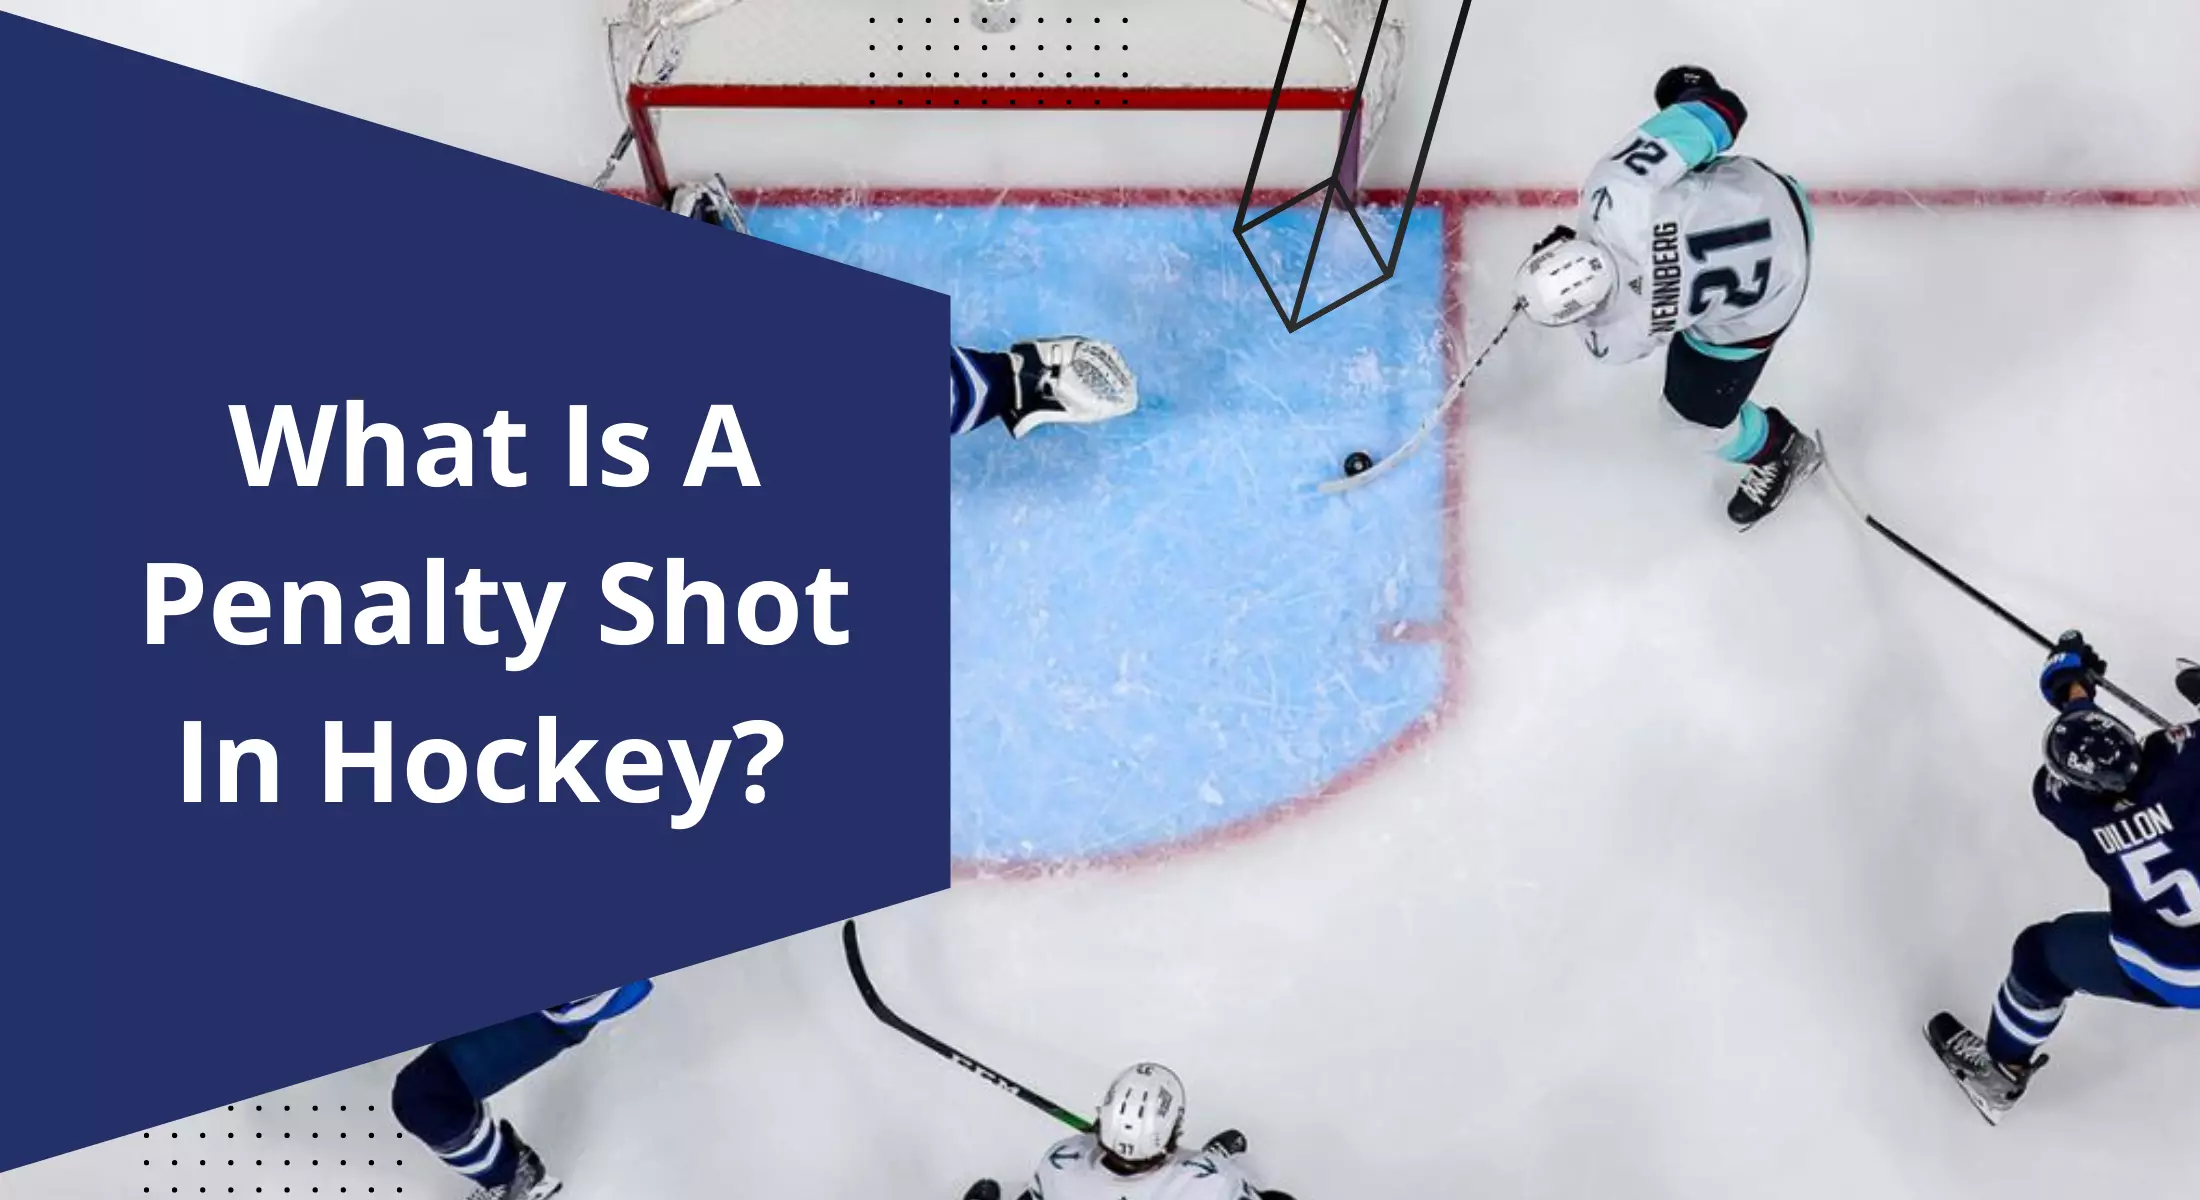 What Is A Penalty Shot In Hockey